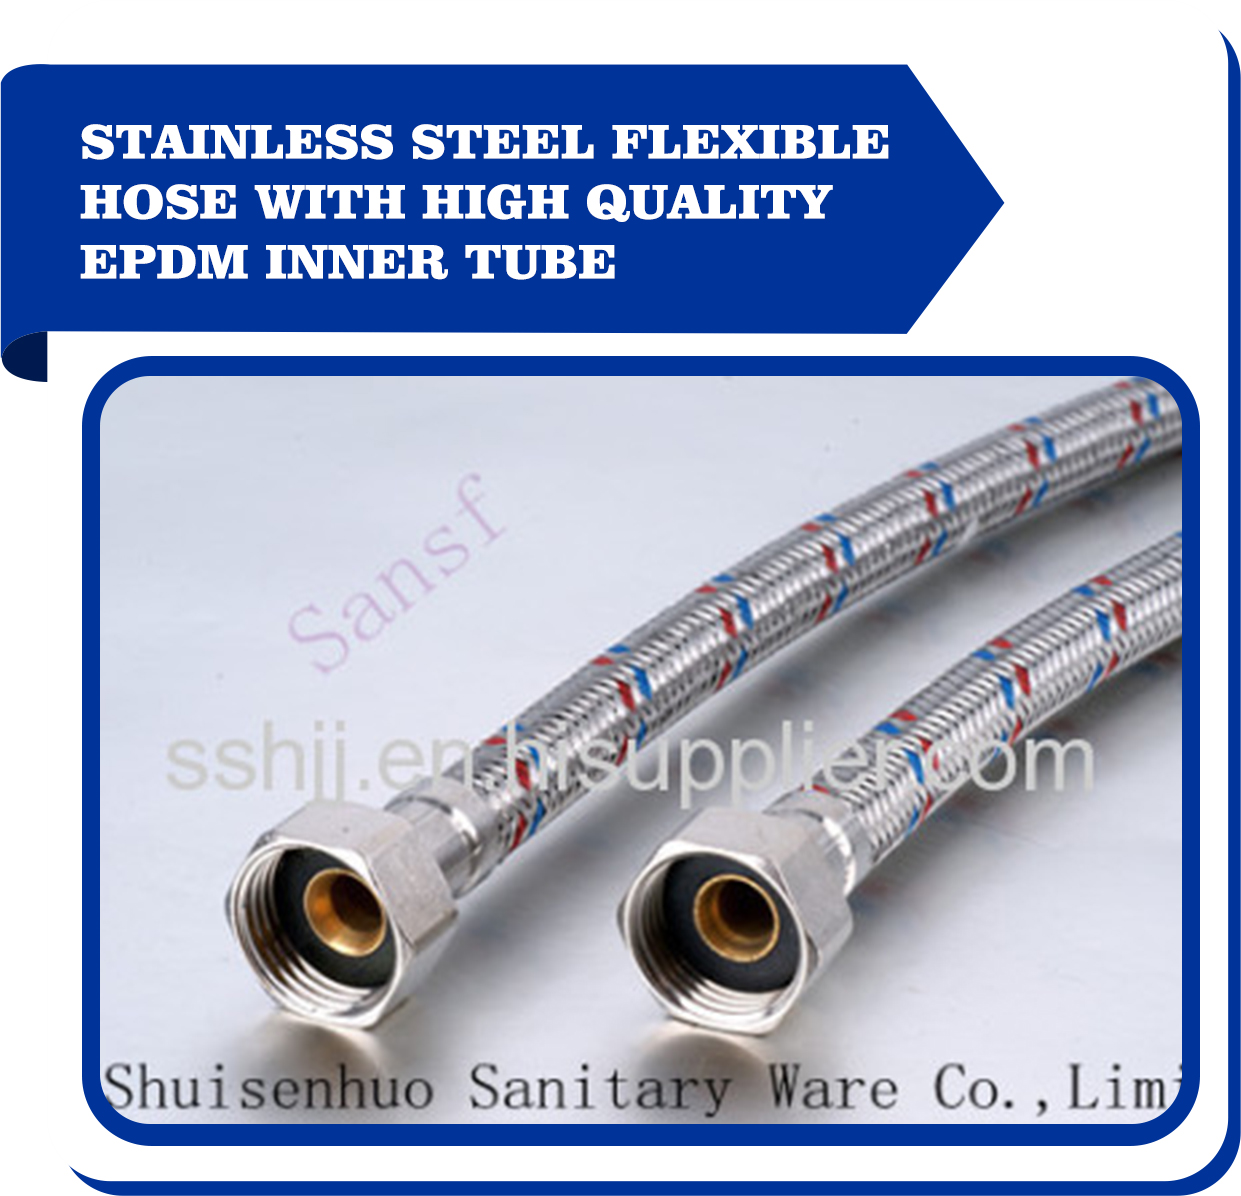 Stainless steel flexible hose with high quality EPDM inner tube